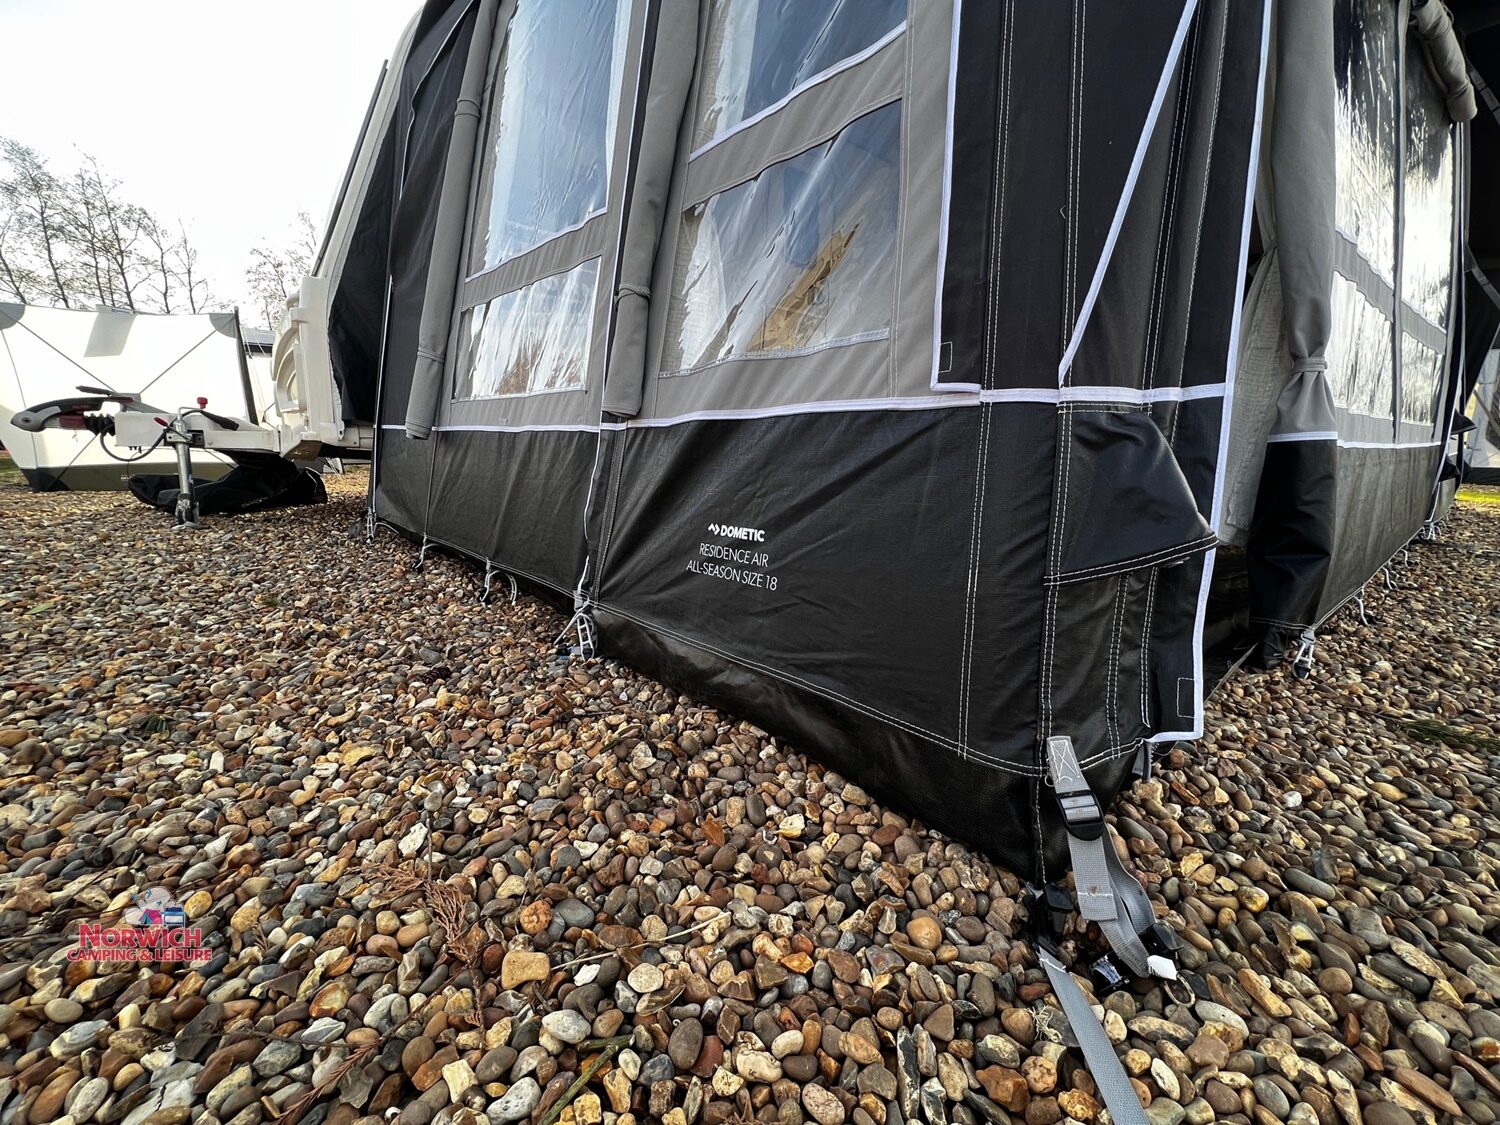 Dometic Residence All Season Awning On A Bailey Caravan At Norwich Camping 4